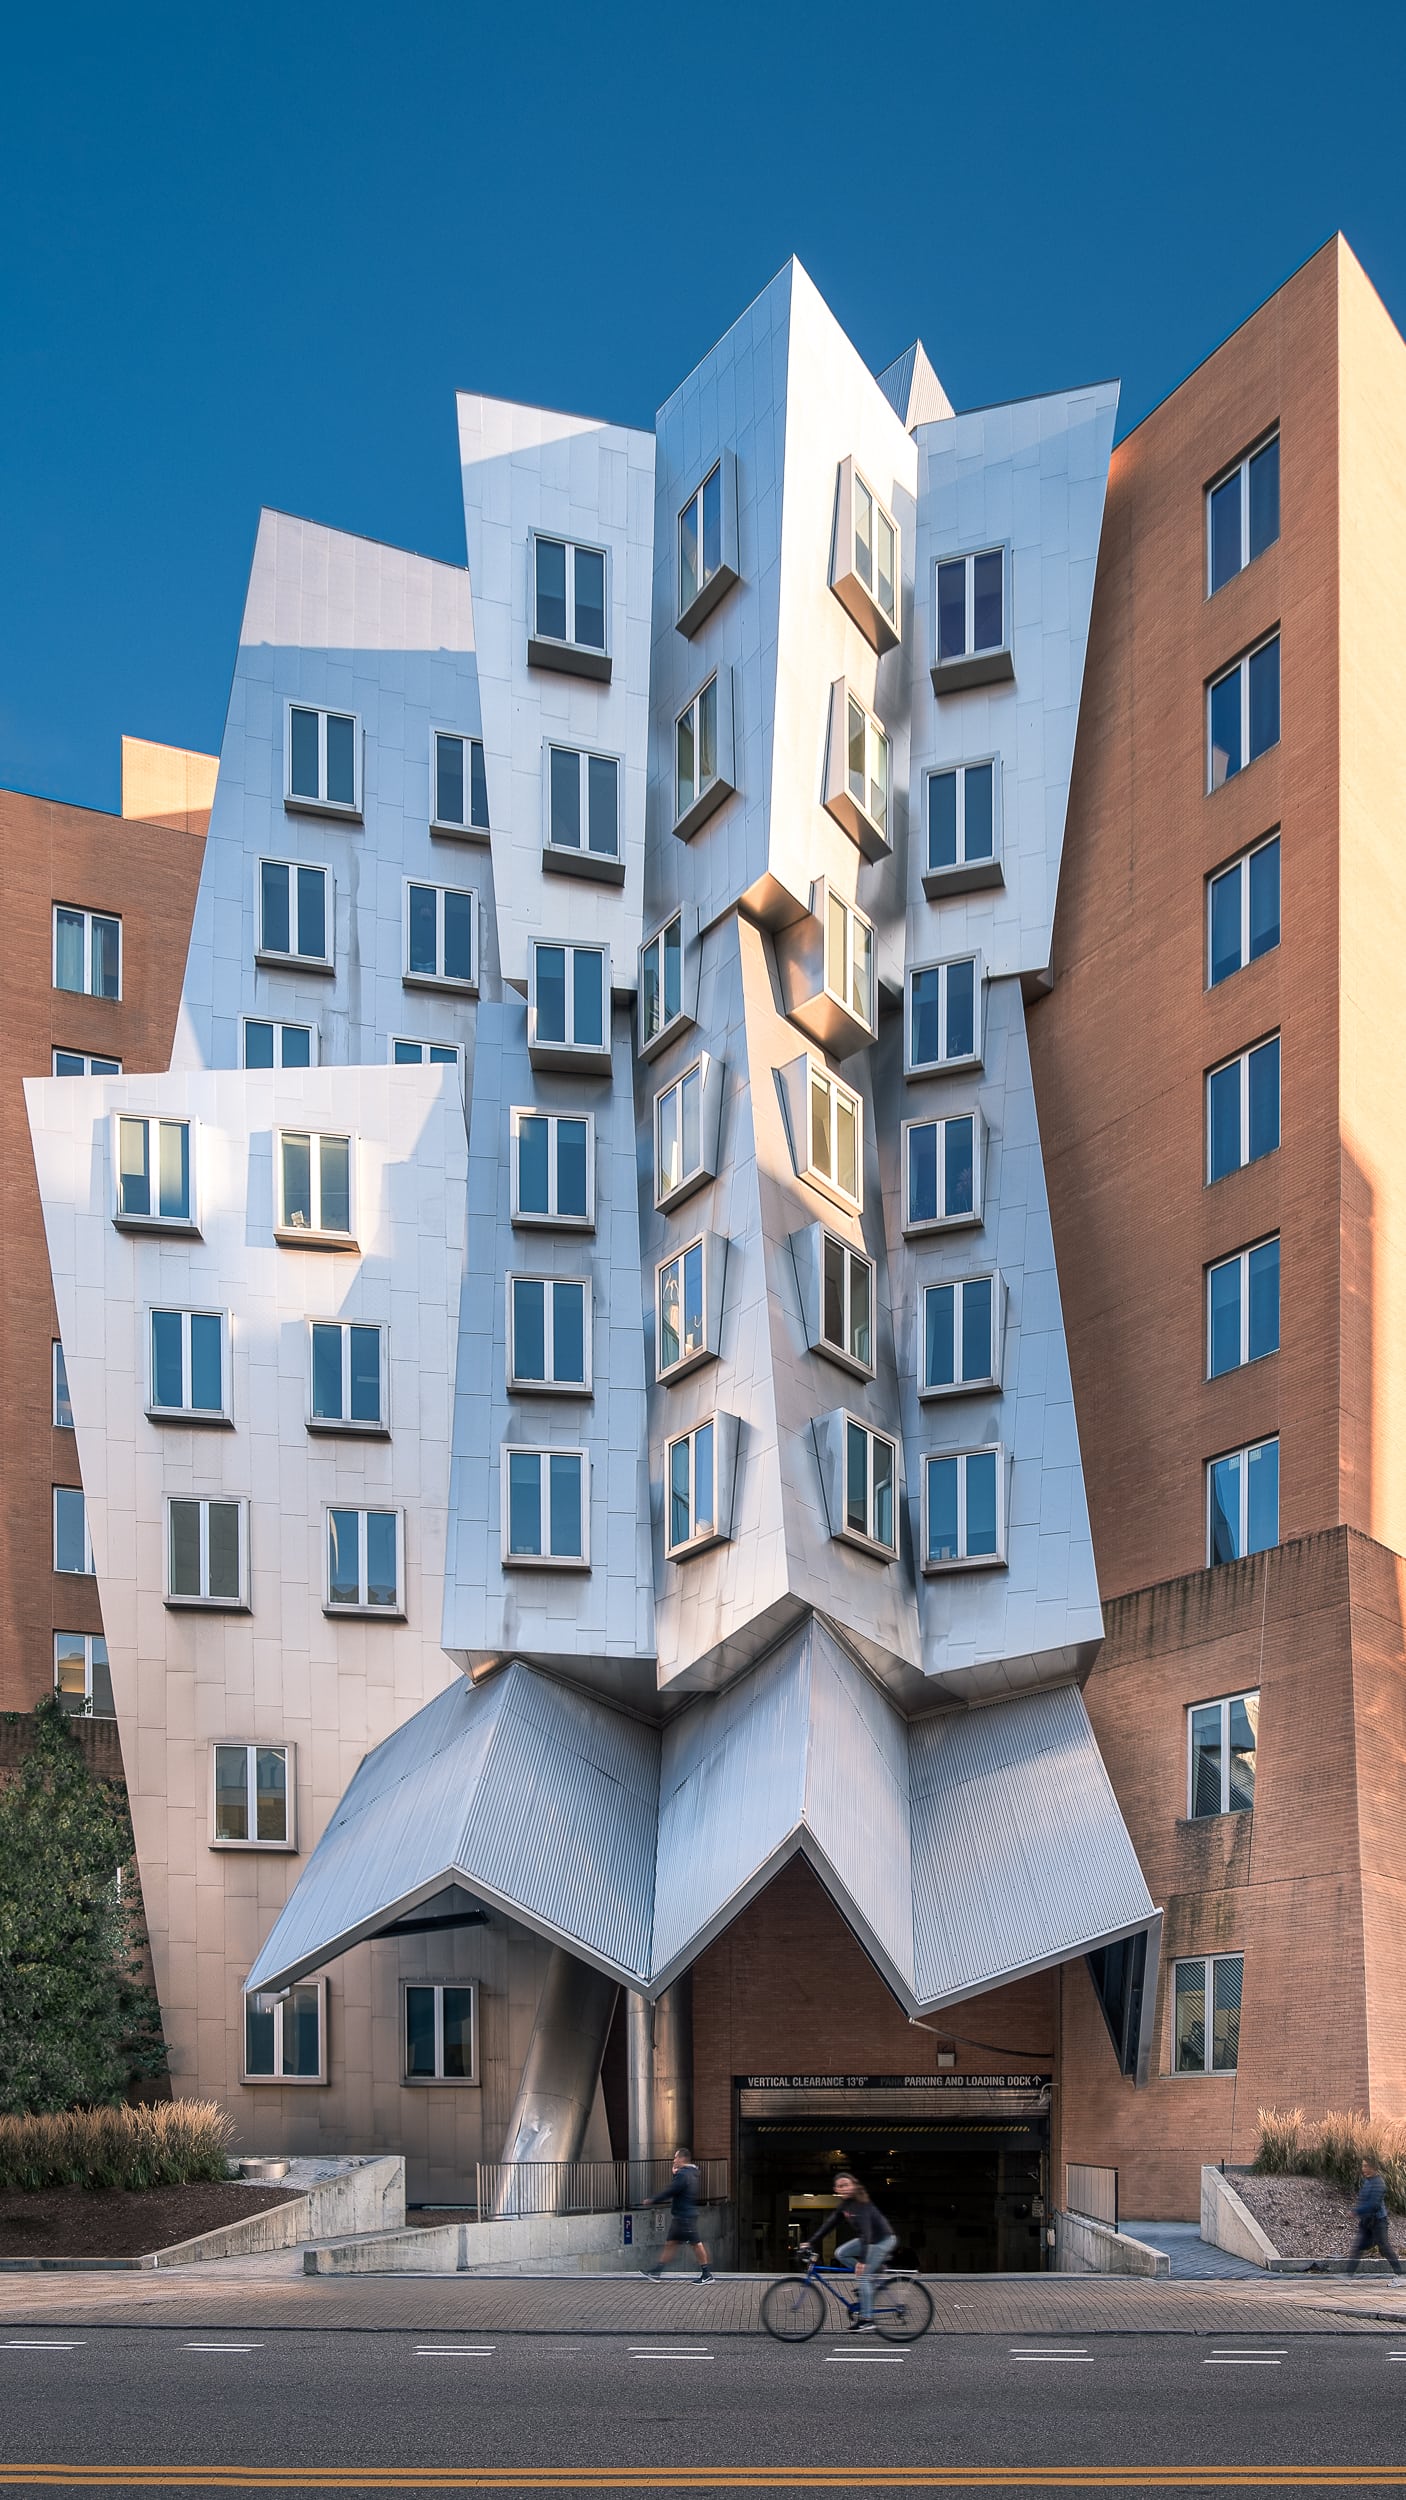 Architectural photography of the Ray and Maria Stata Center at the Massachusetts Institute of Technology (MIT) in Boston designed by Frank Gehry featuring a side angle capturing the brick and aluminum main building in a one point perspective straight on